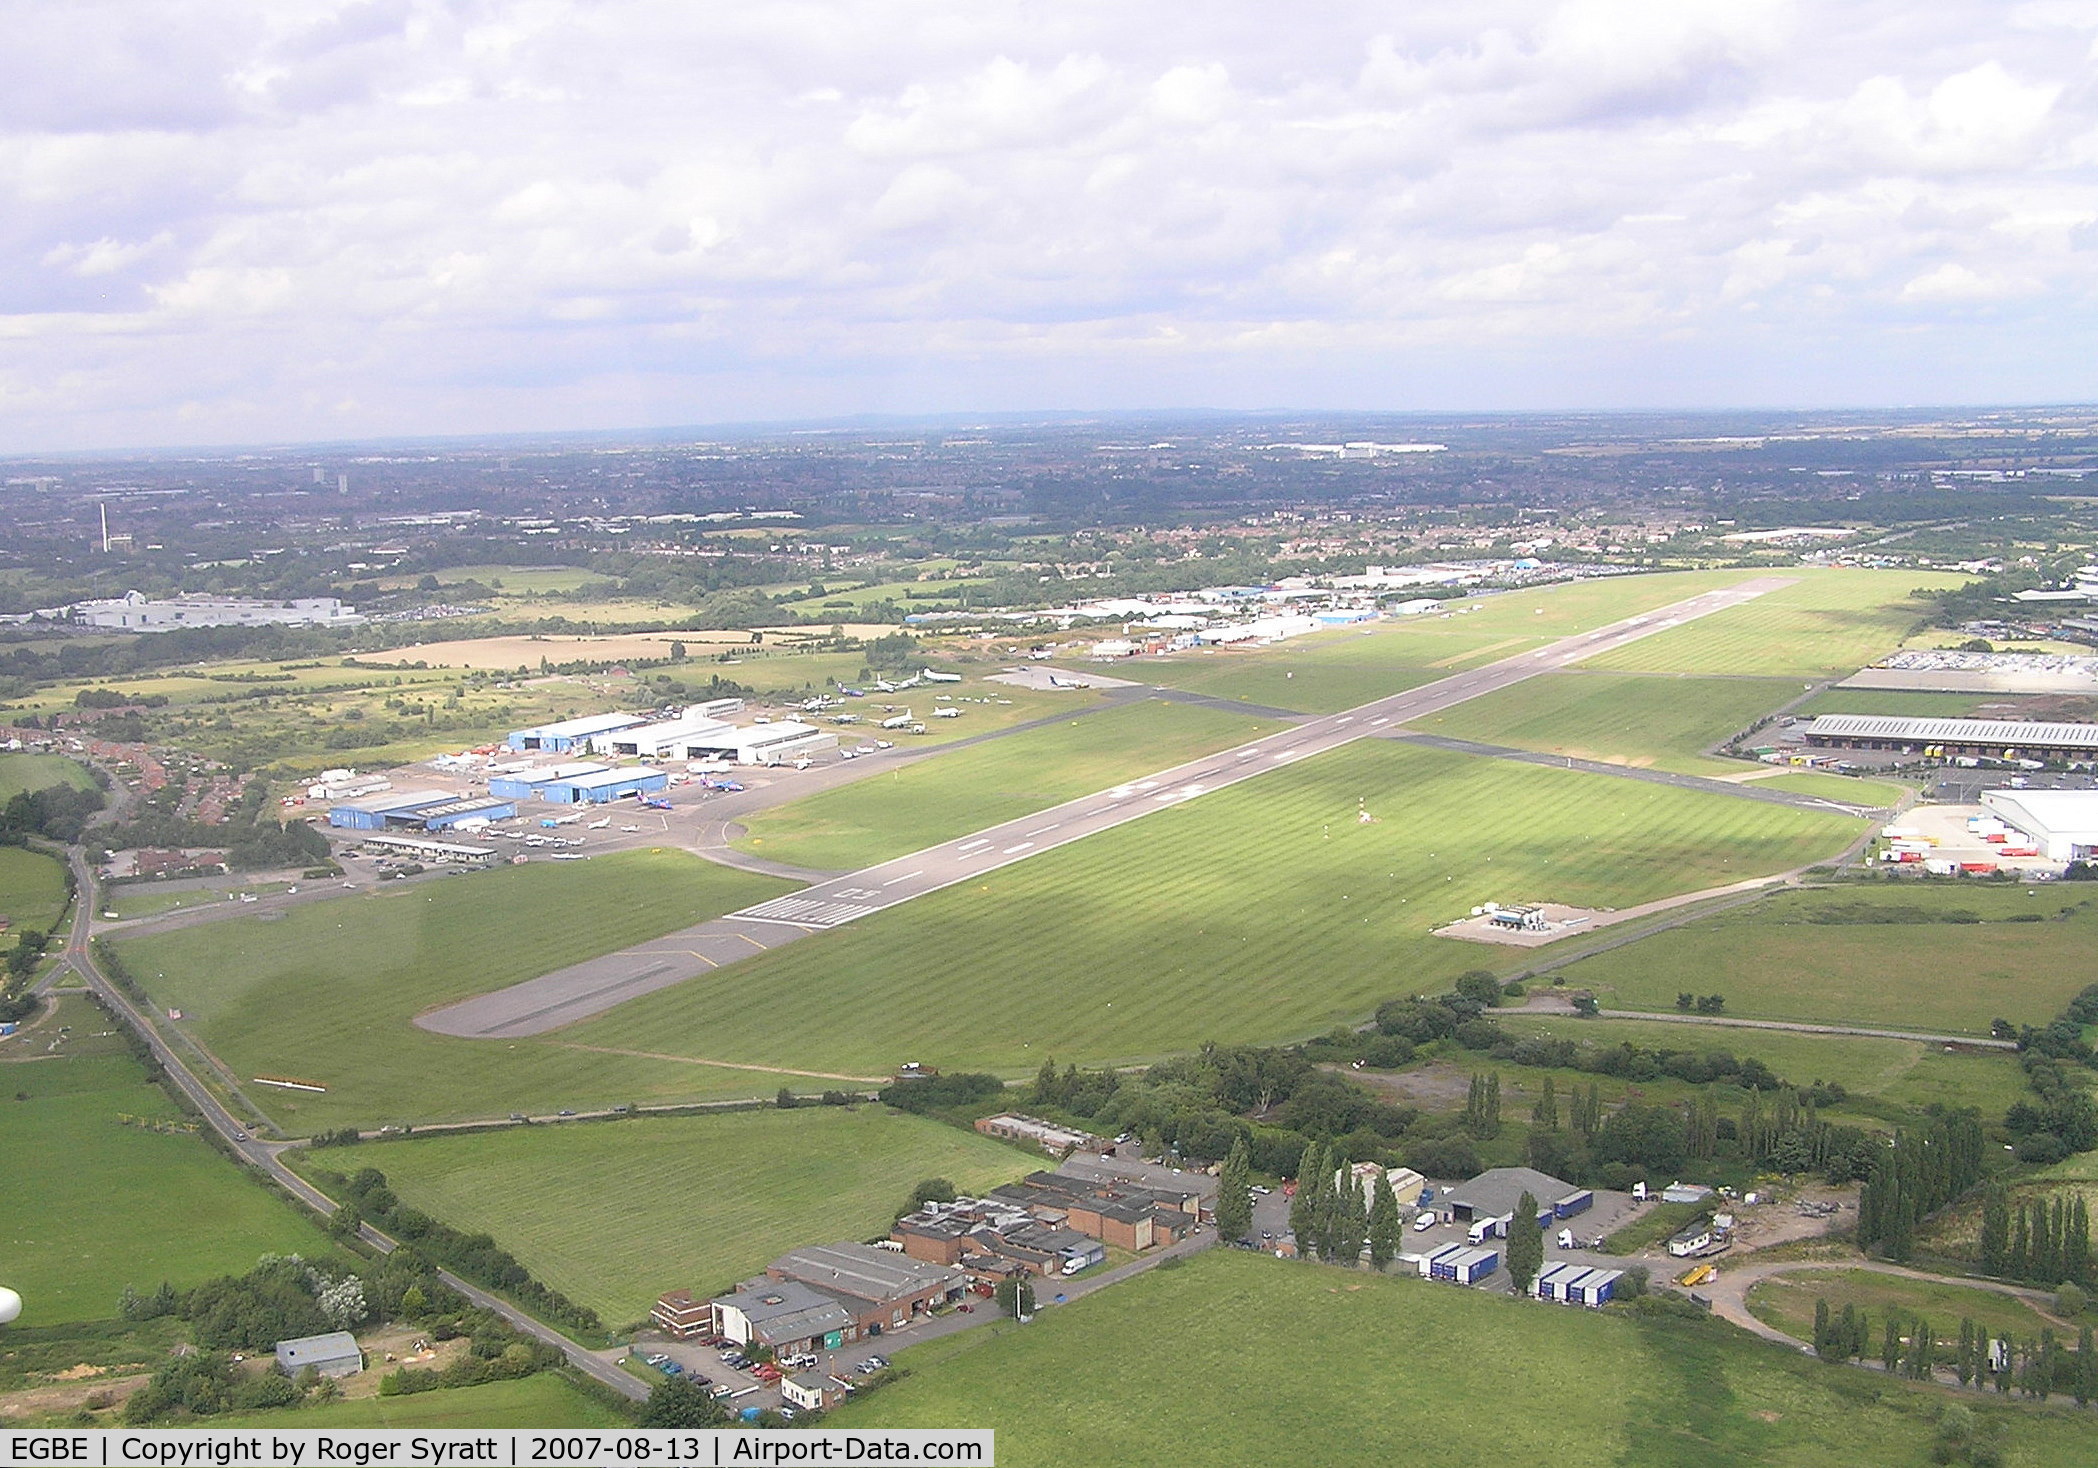 Coventry Airport, Coventry, England United Kingdom (EGBE) - Coventry, England